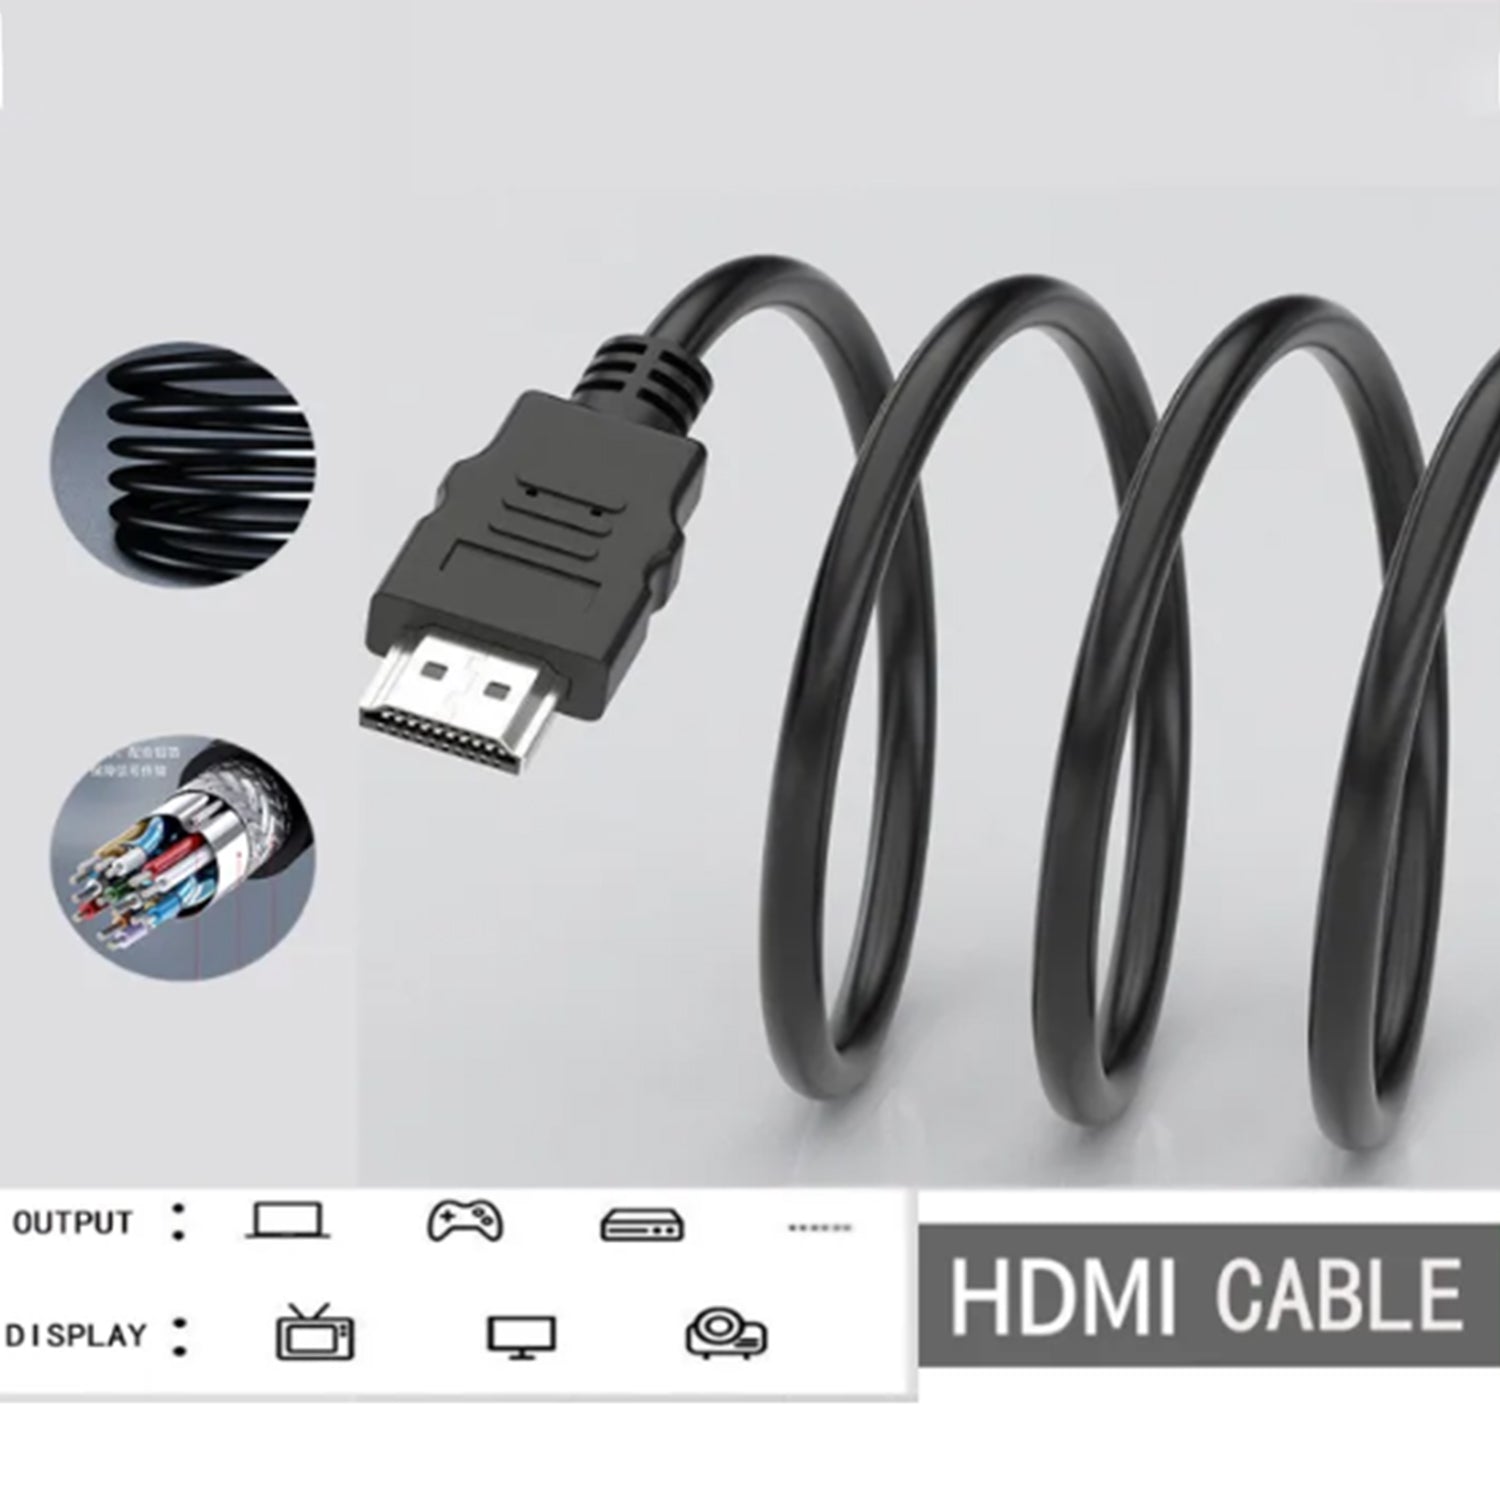 25FT HDMI to Hdmi High-Definition Television to PC Data Cable-Black